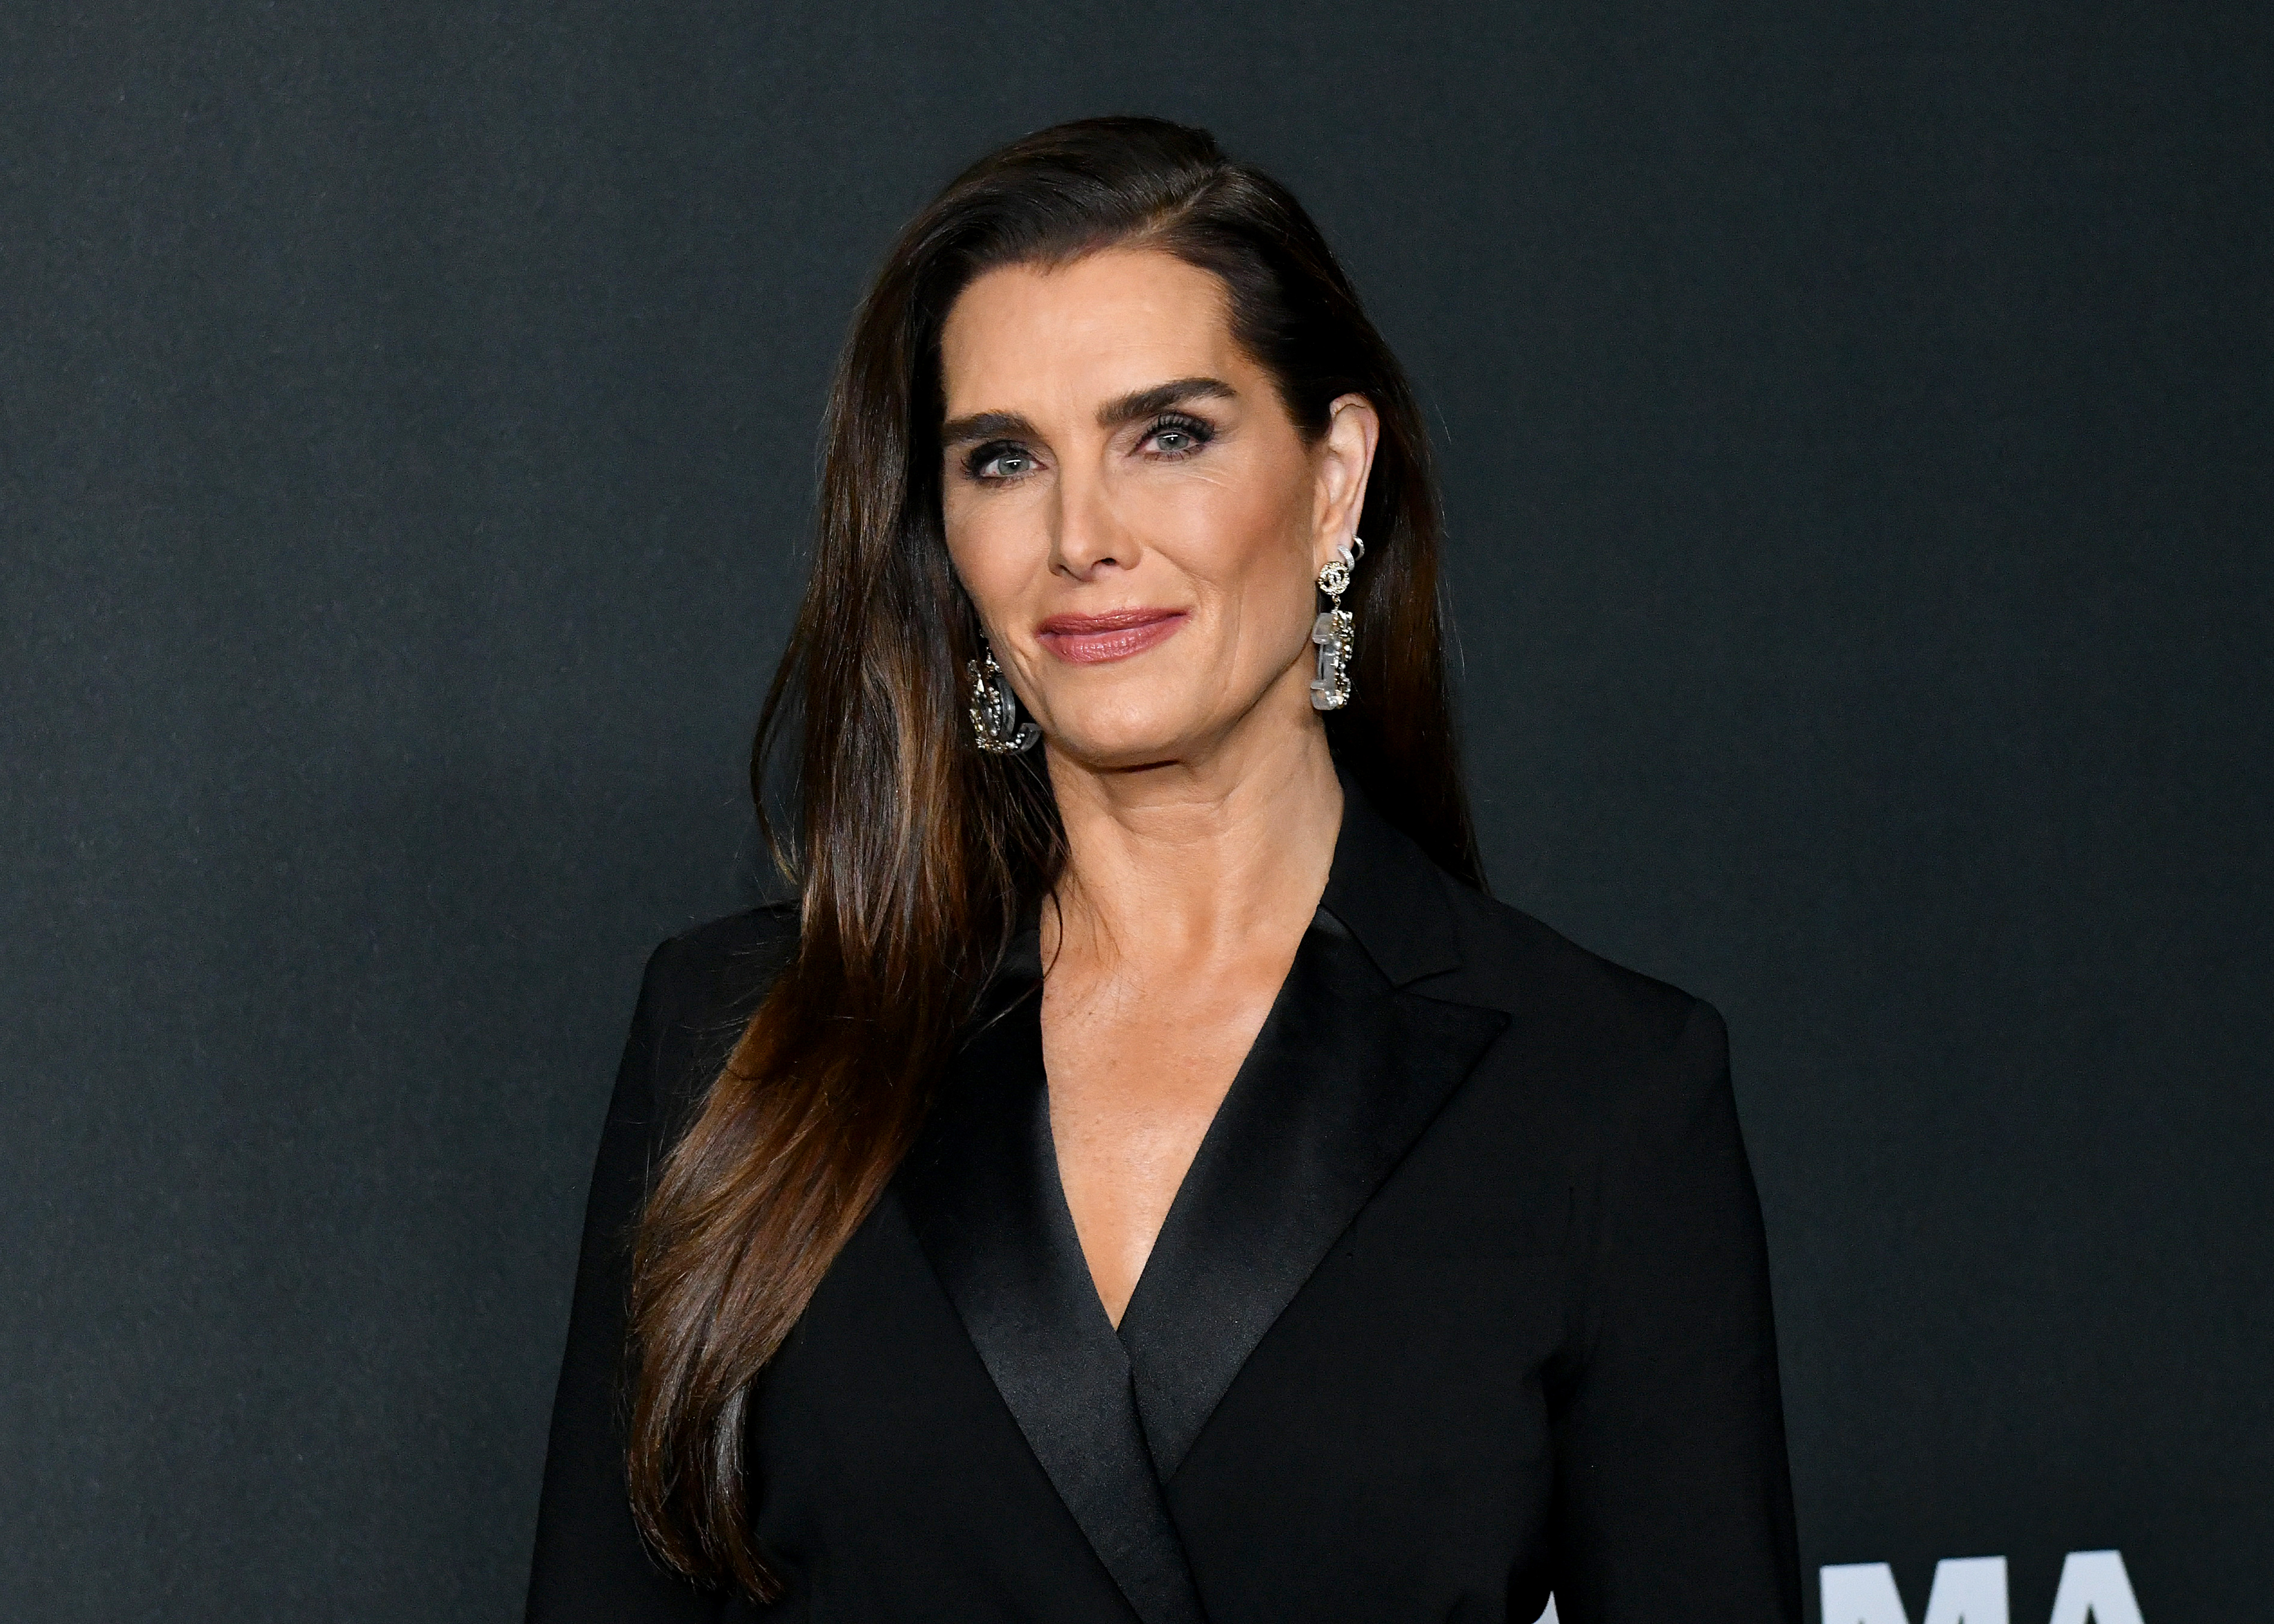 Brooke Shields on November 12, 2019 in New York City. | Source: Getty Images